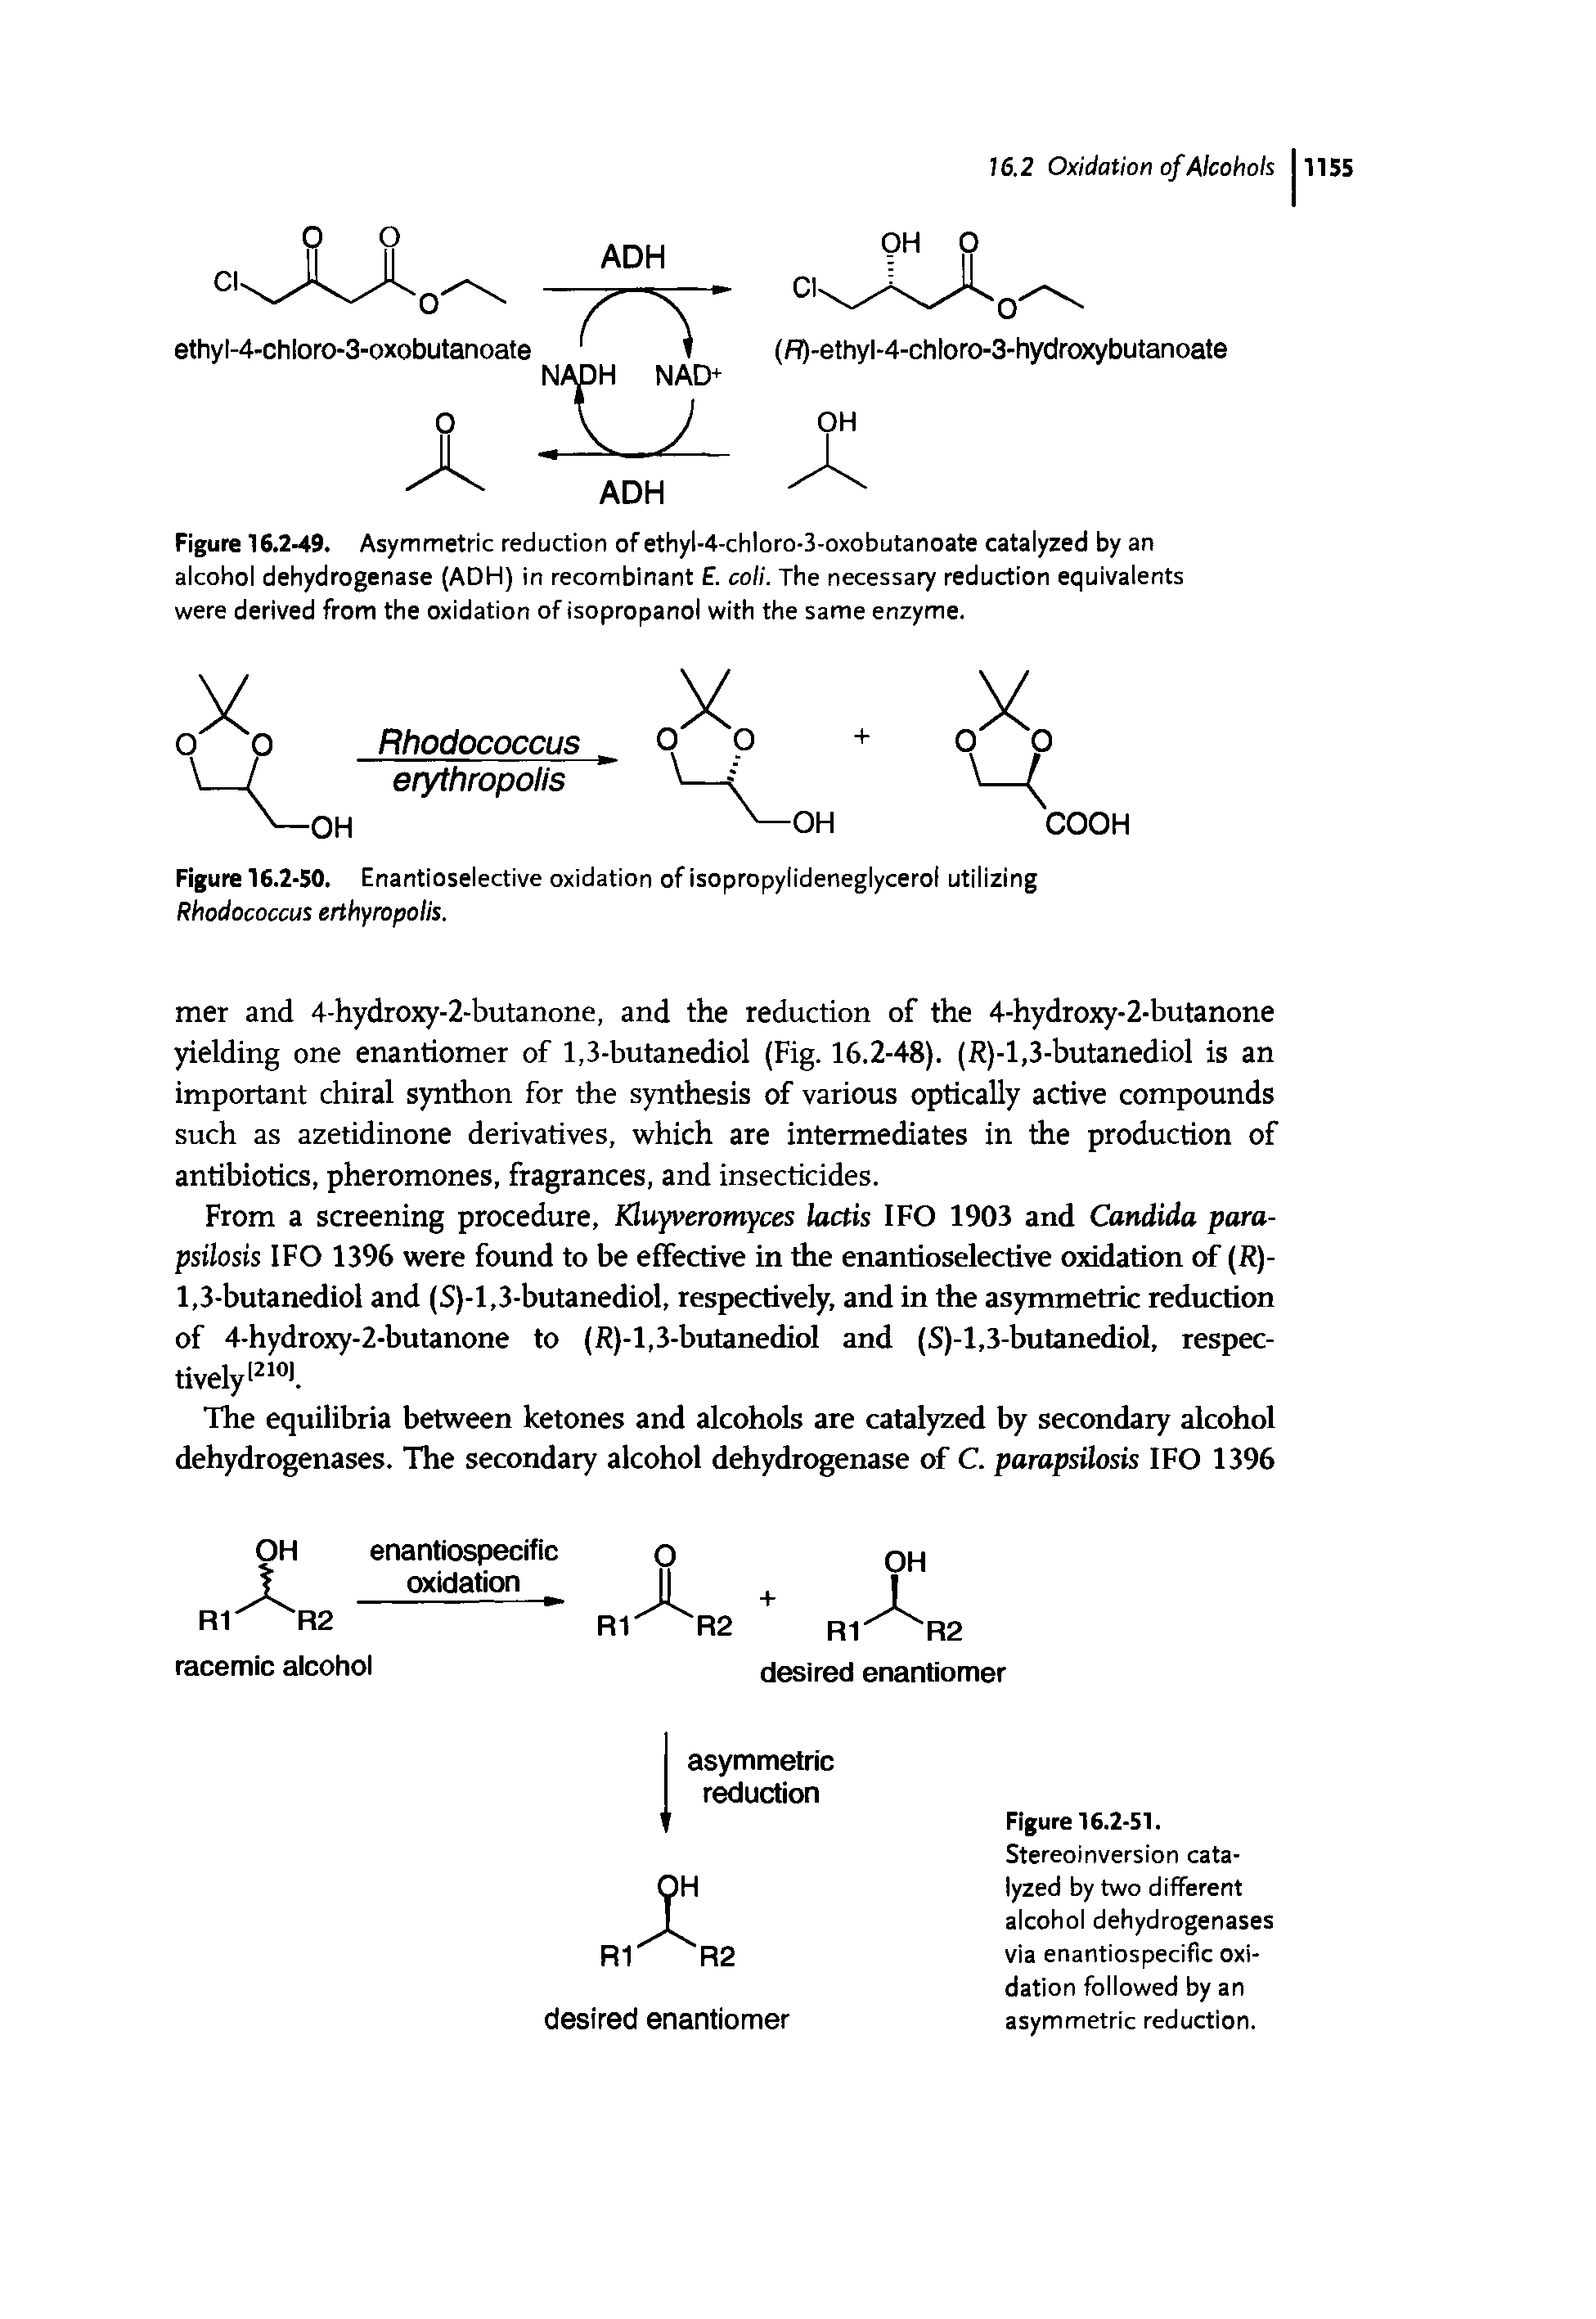 Figure 16.2-49. Asymmetric reduction of ethyl-4-chloro-3-oxobutanoate catalyzed by an alcohol dehydrogenase (ADH) in recombinant E. coli. The necessary reduction equivalents were derived from the oxidation of isopropanol with the same enzyme.